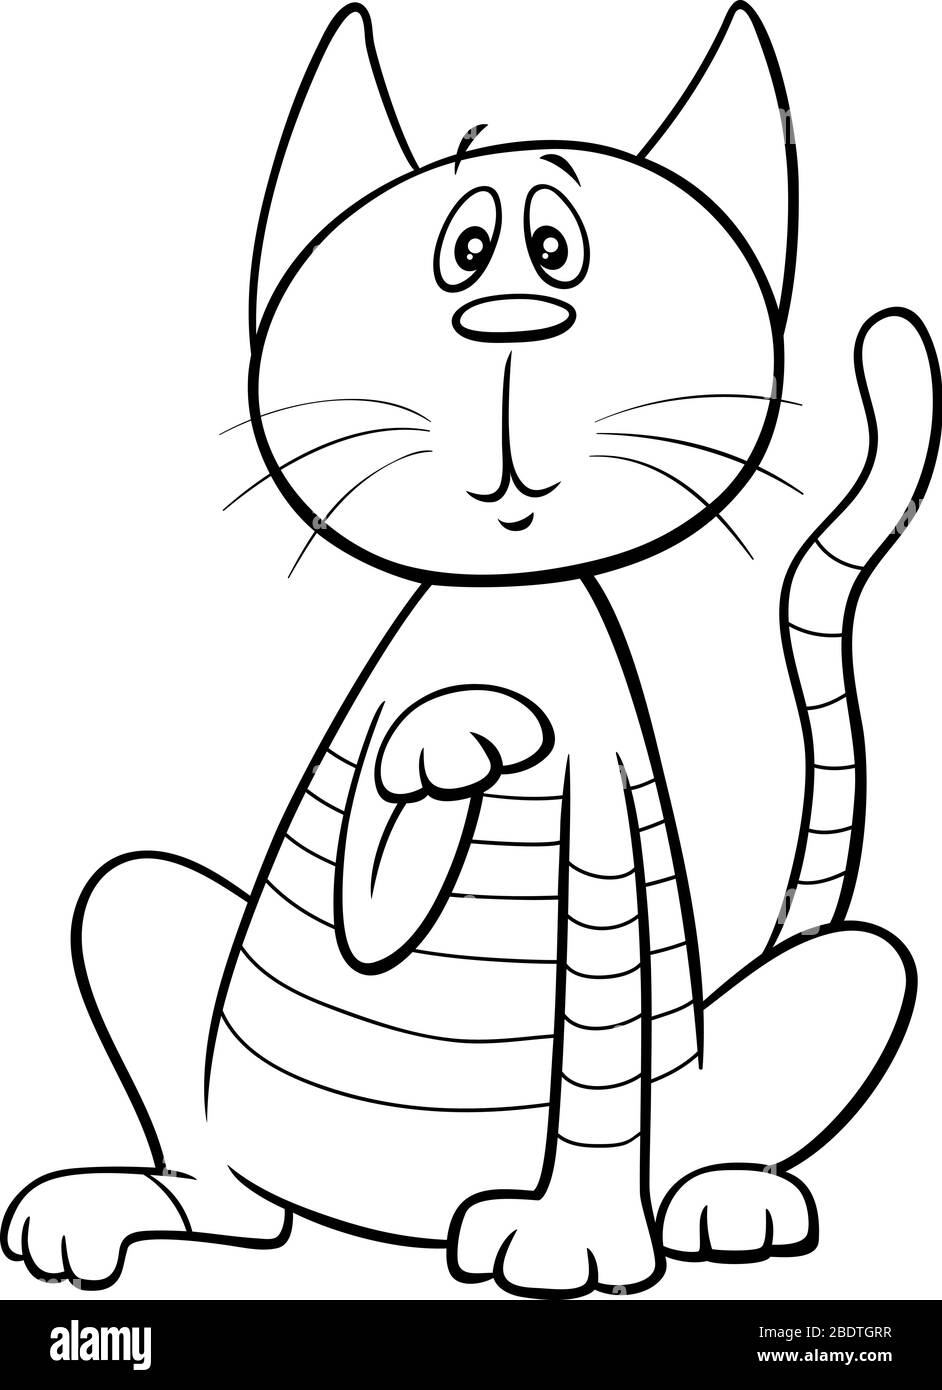 Black and White Cartoon Illustration of Funny surprise Cat ou Kitten Comic Animal Character Coloring Book Page Illustration de Vecteur